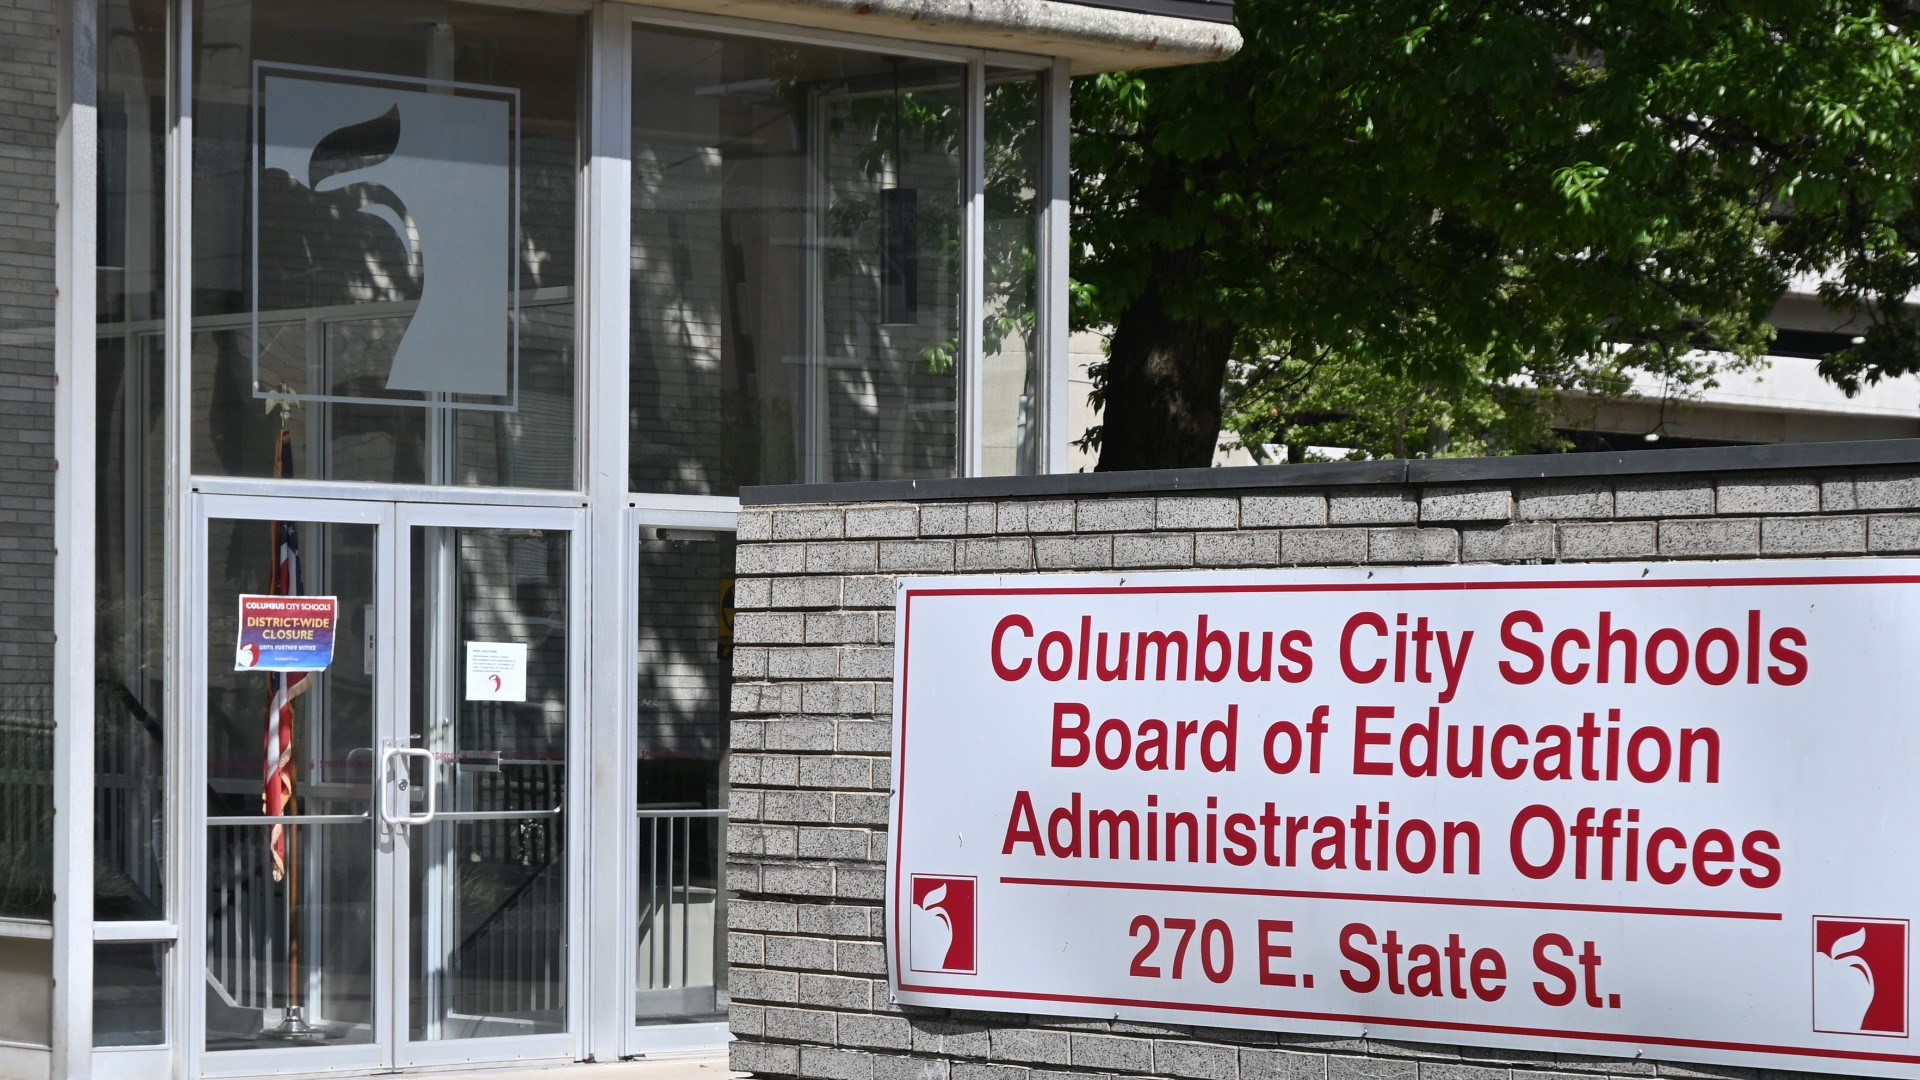 Columbus City Schools Board of Education said they made the Columbus Education Association a “final offer” last week for pending negotiations.